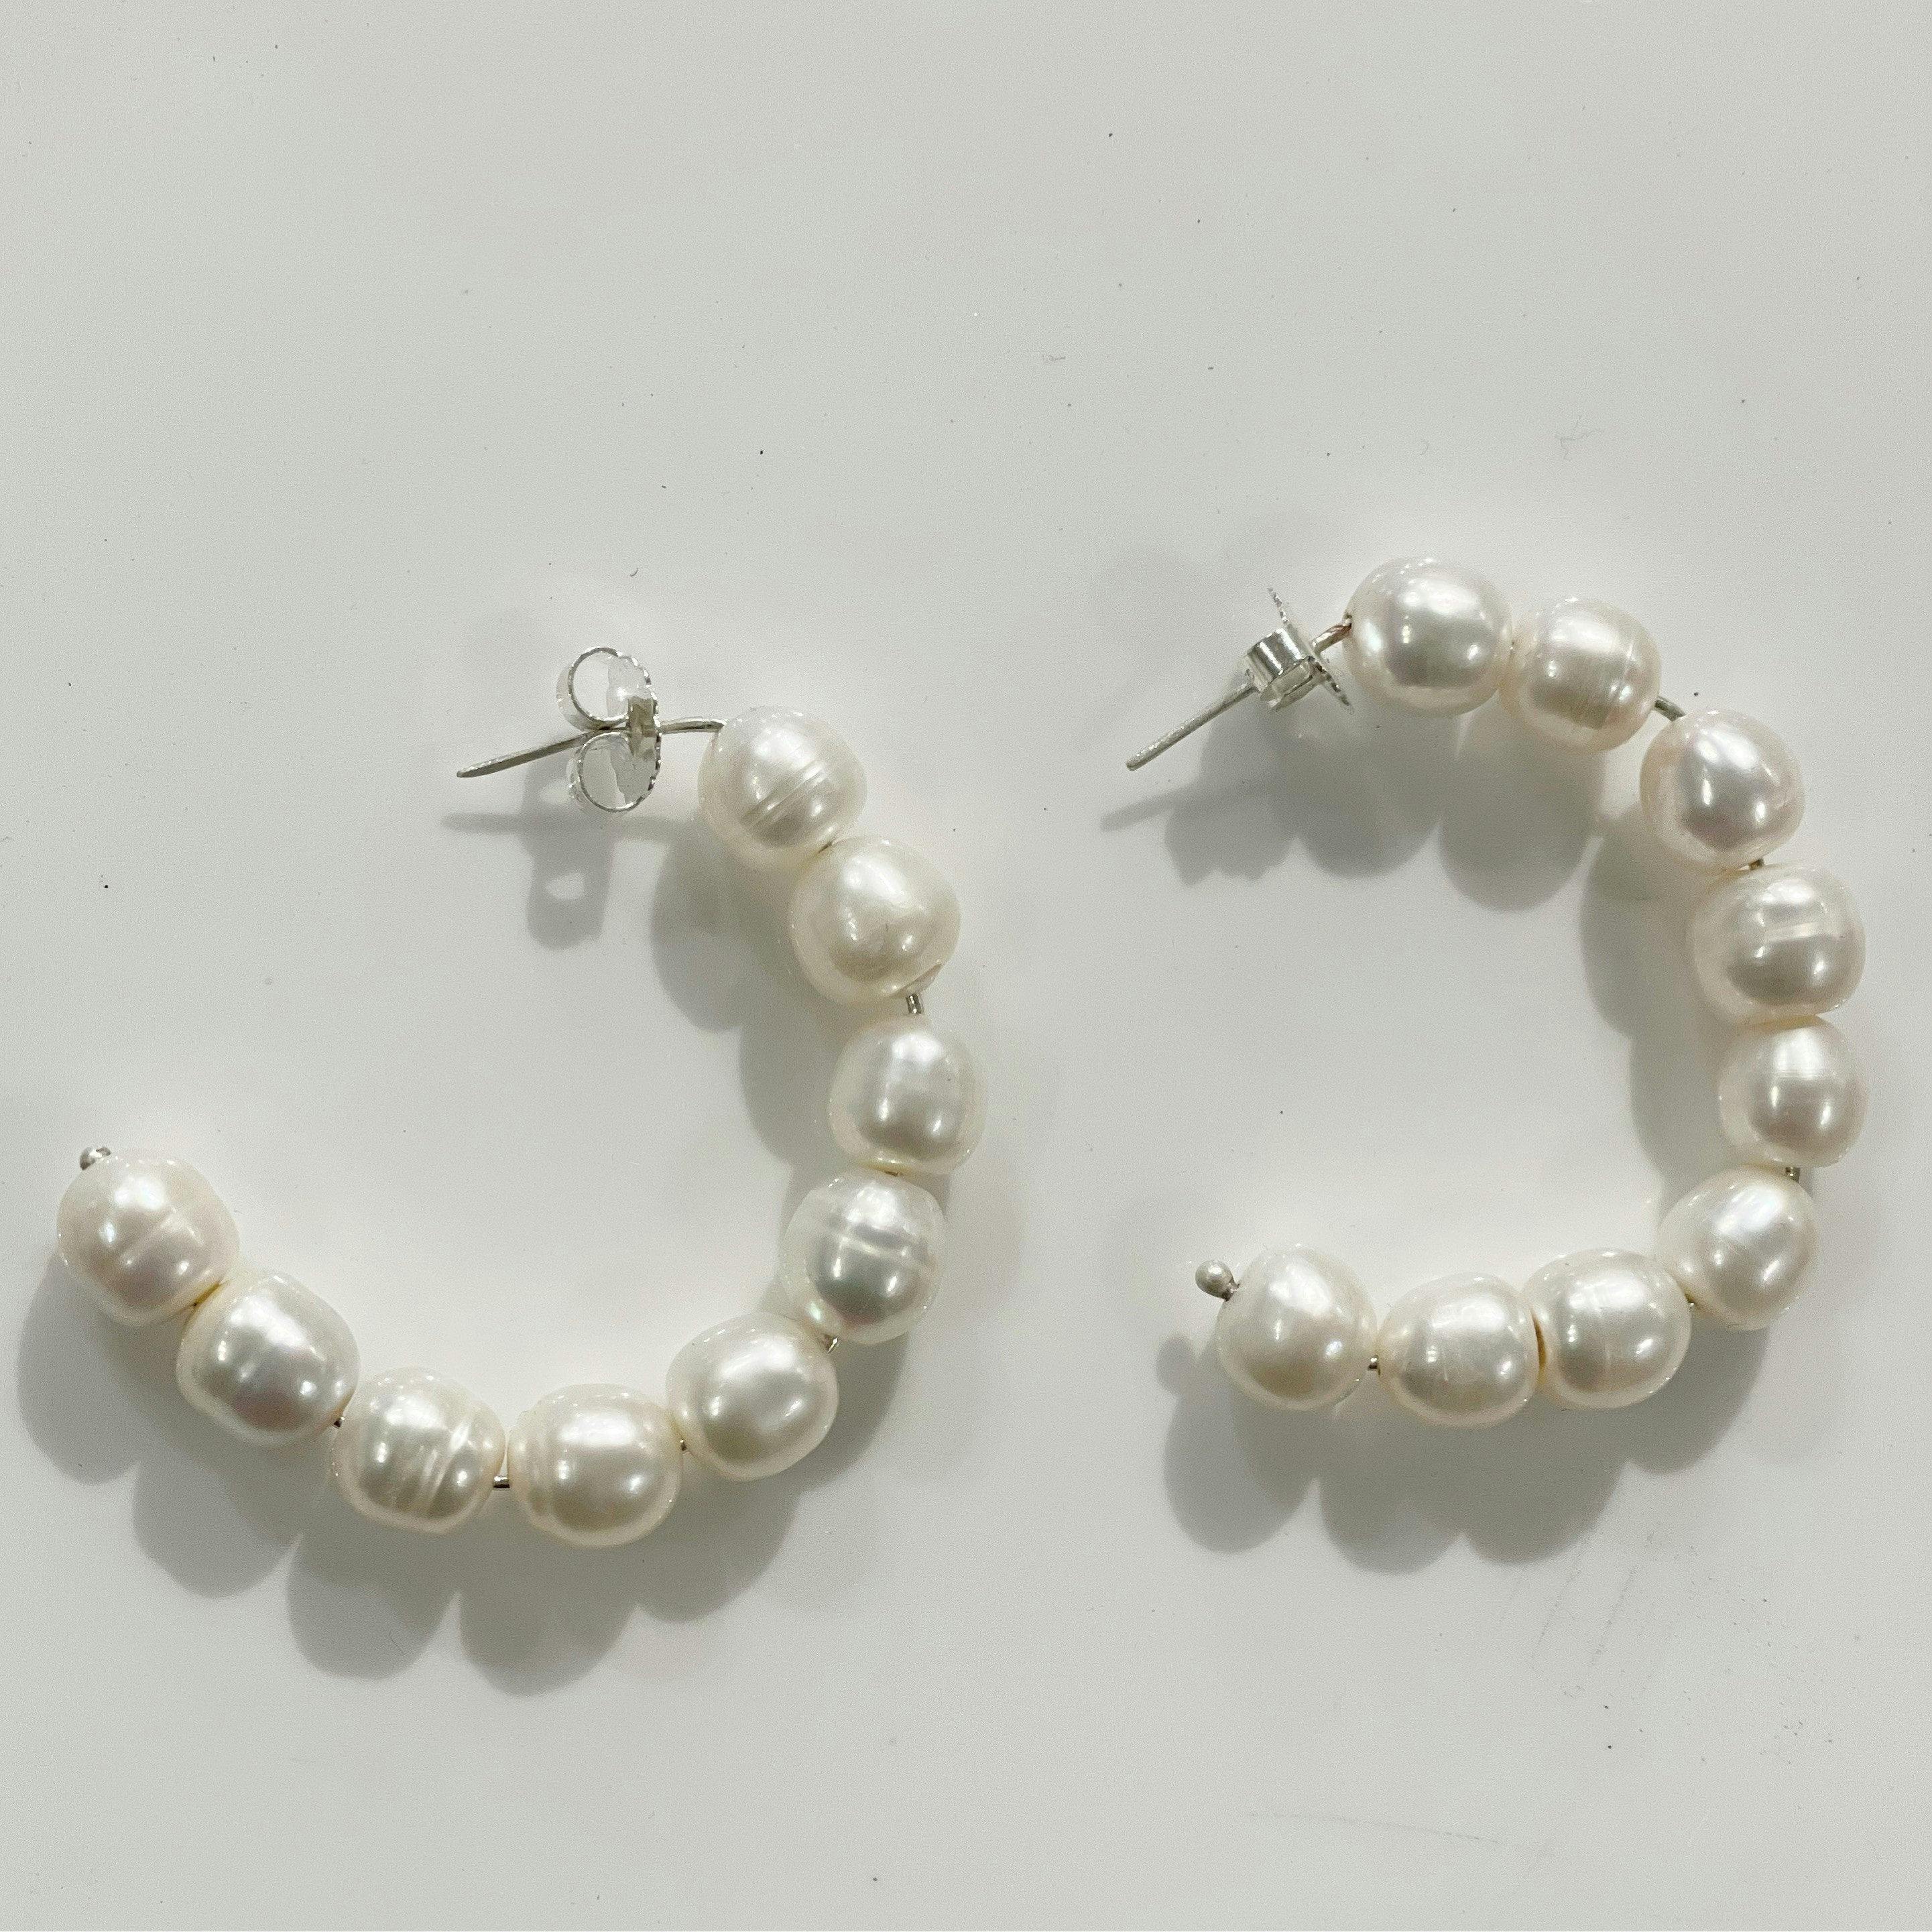 Claire (white 8mm pearls), a product by Jenny Greco Jewellery